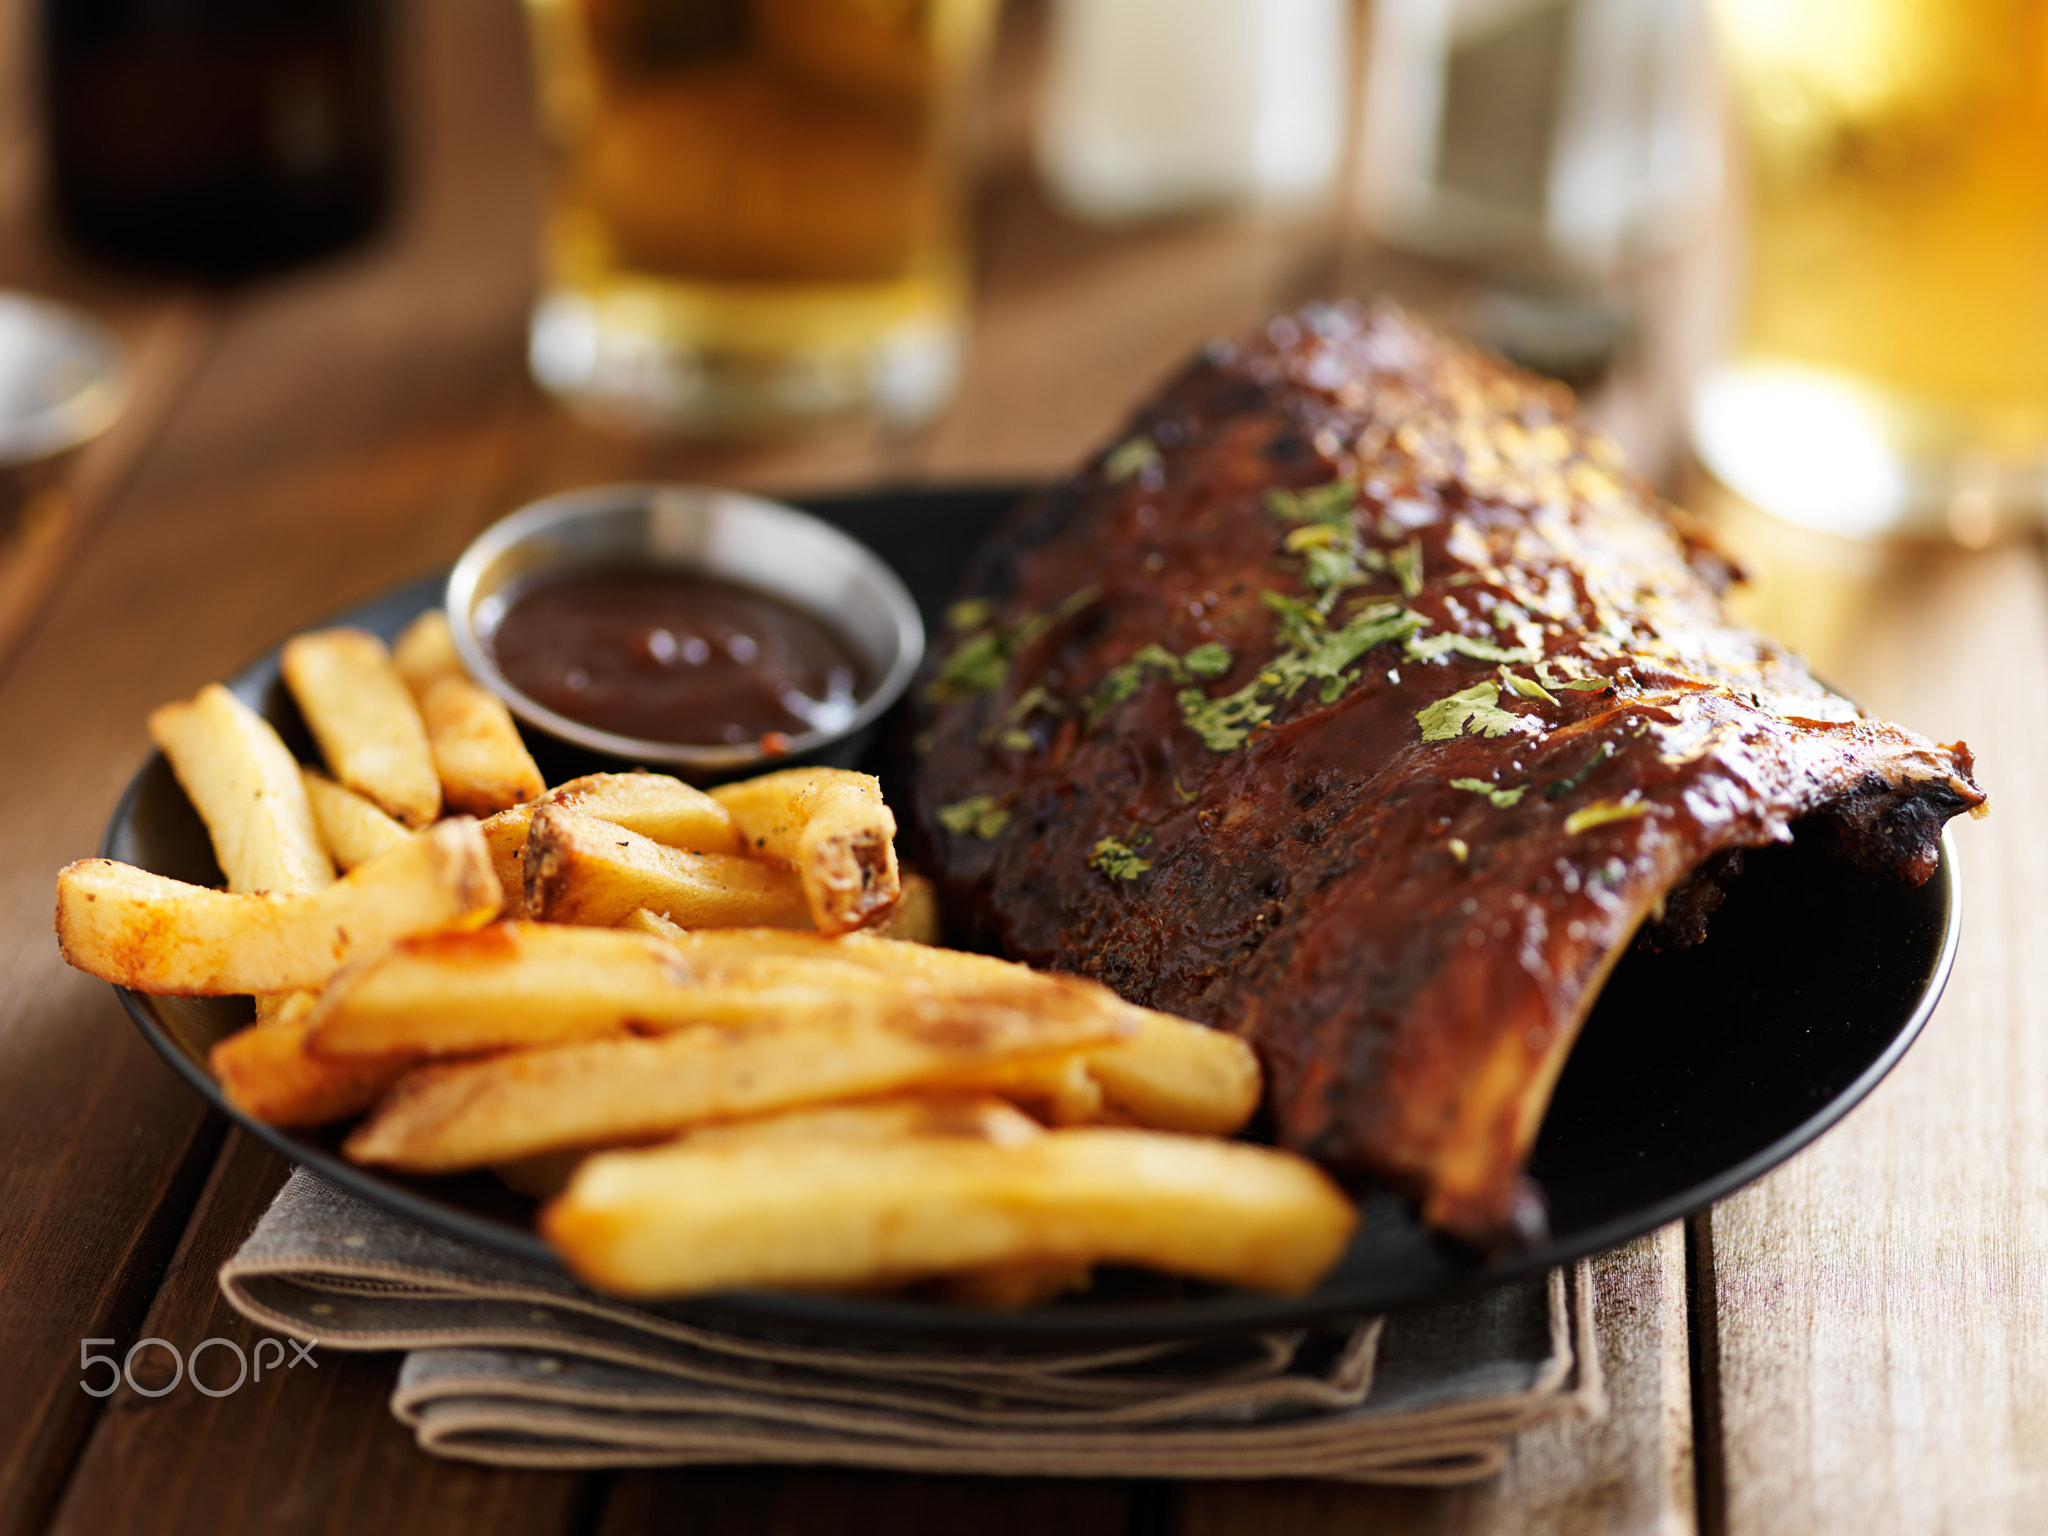 plate of barbecue ribs and fries on wooden table with beer in the background